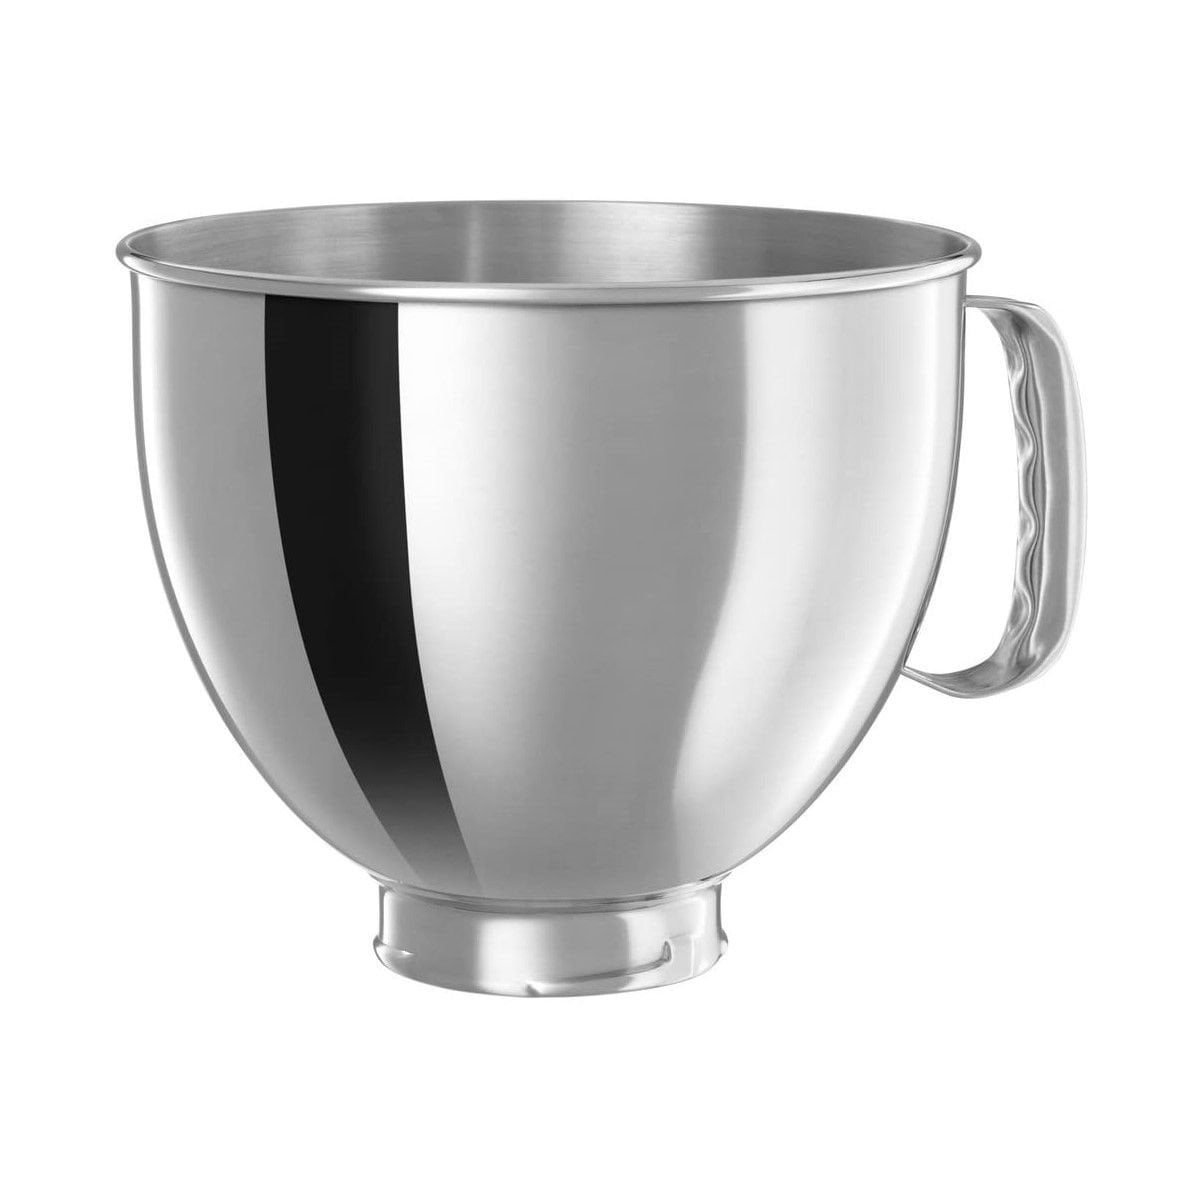 6-Quart Stainless Steel Bowl + Coated Pastry Beater Accessory Pack